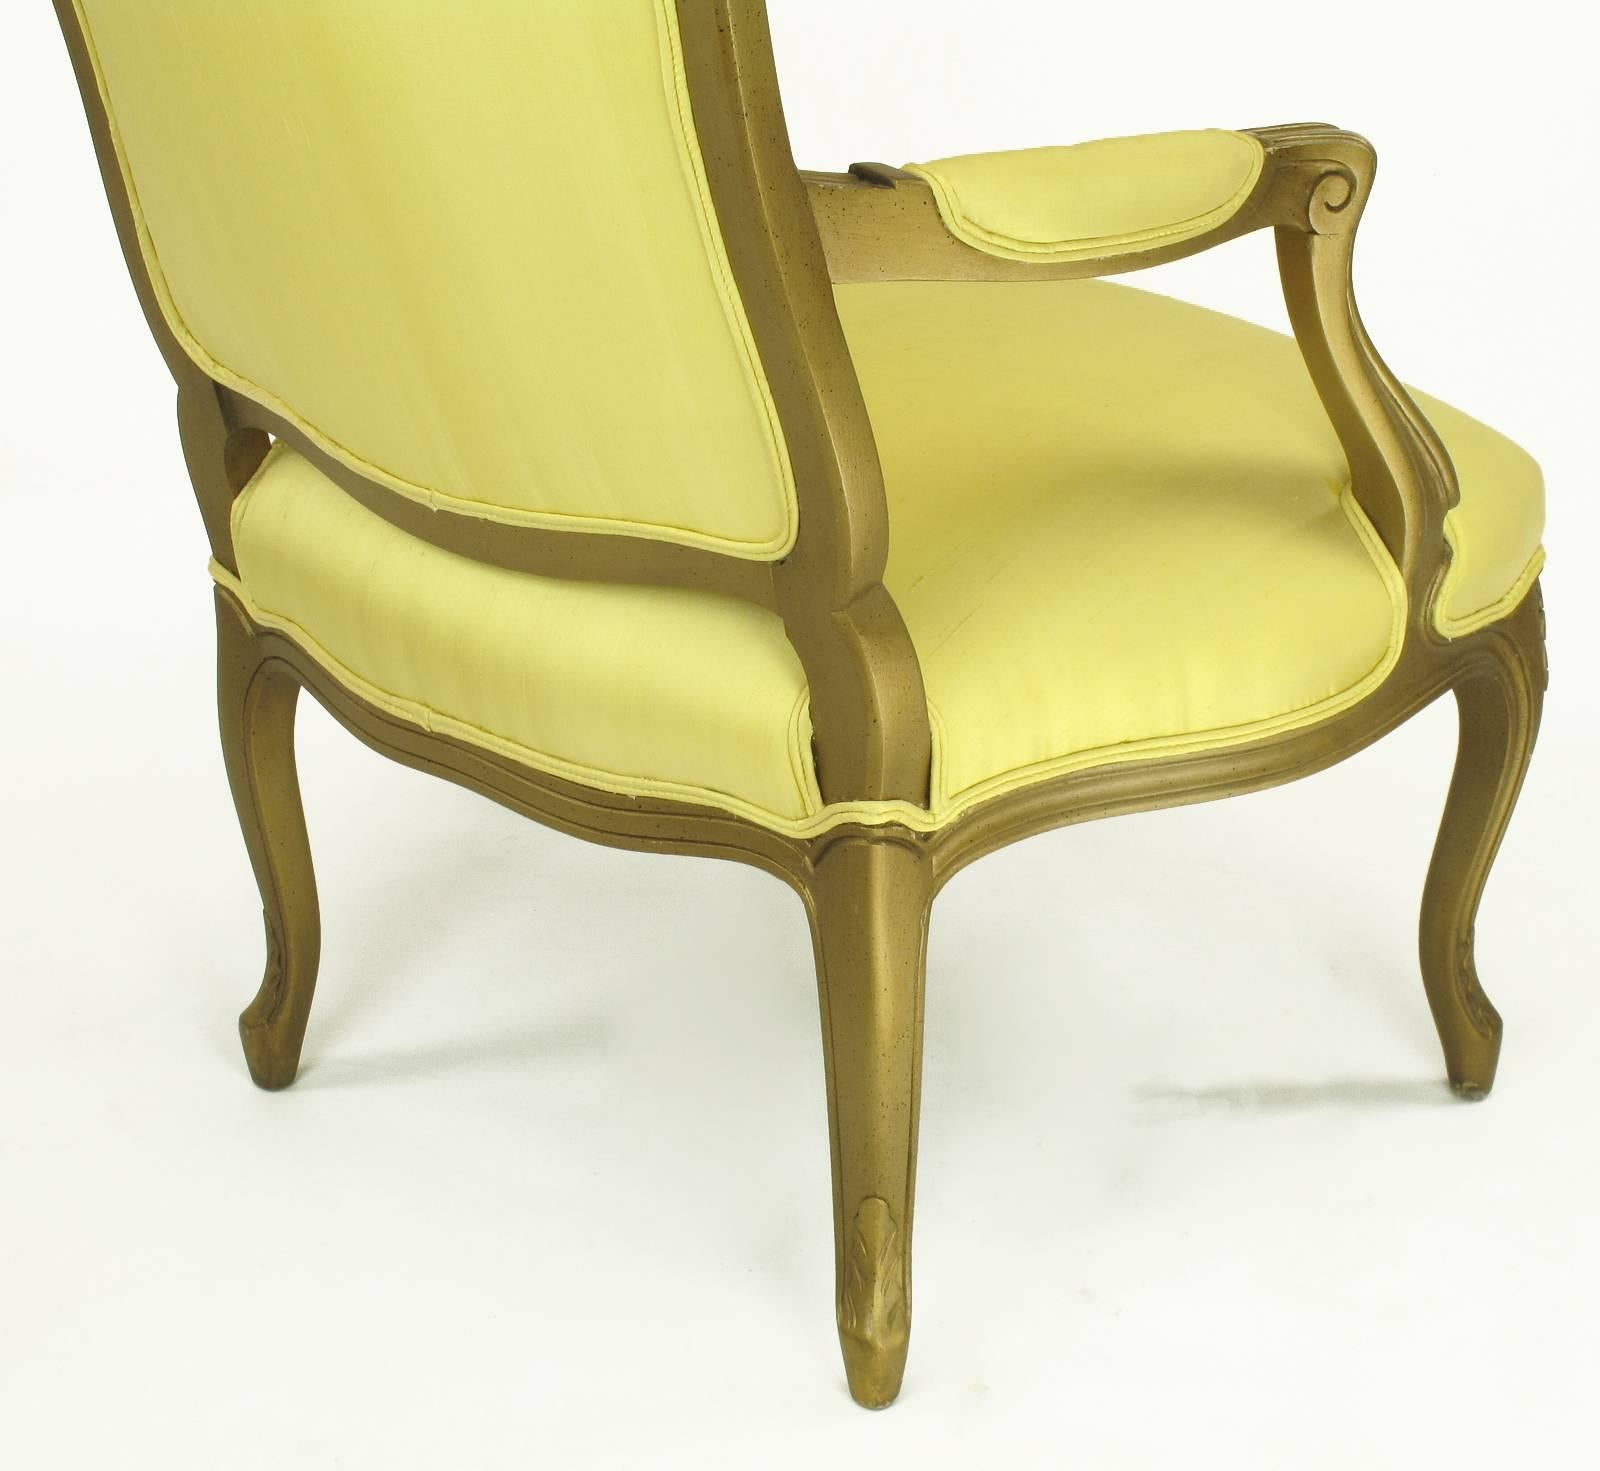 1940s Giltwood Louis XV Style Fauteuil with Saffron Silk Upholstery 1